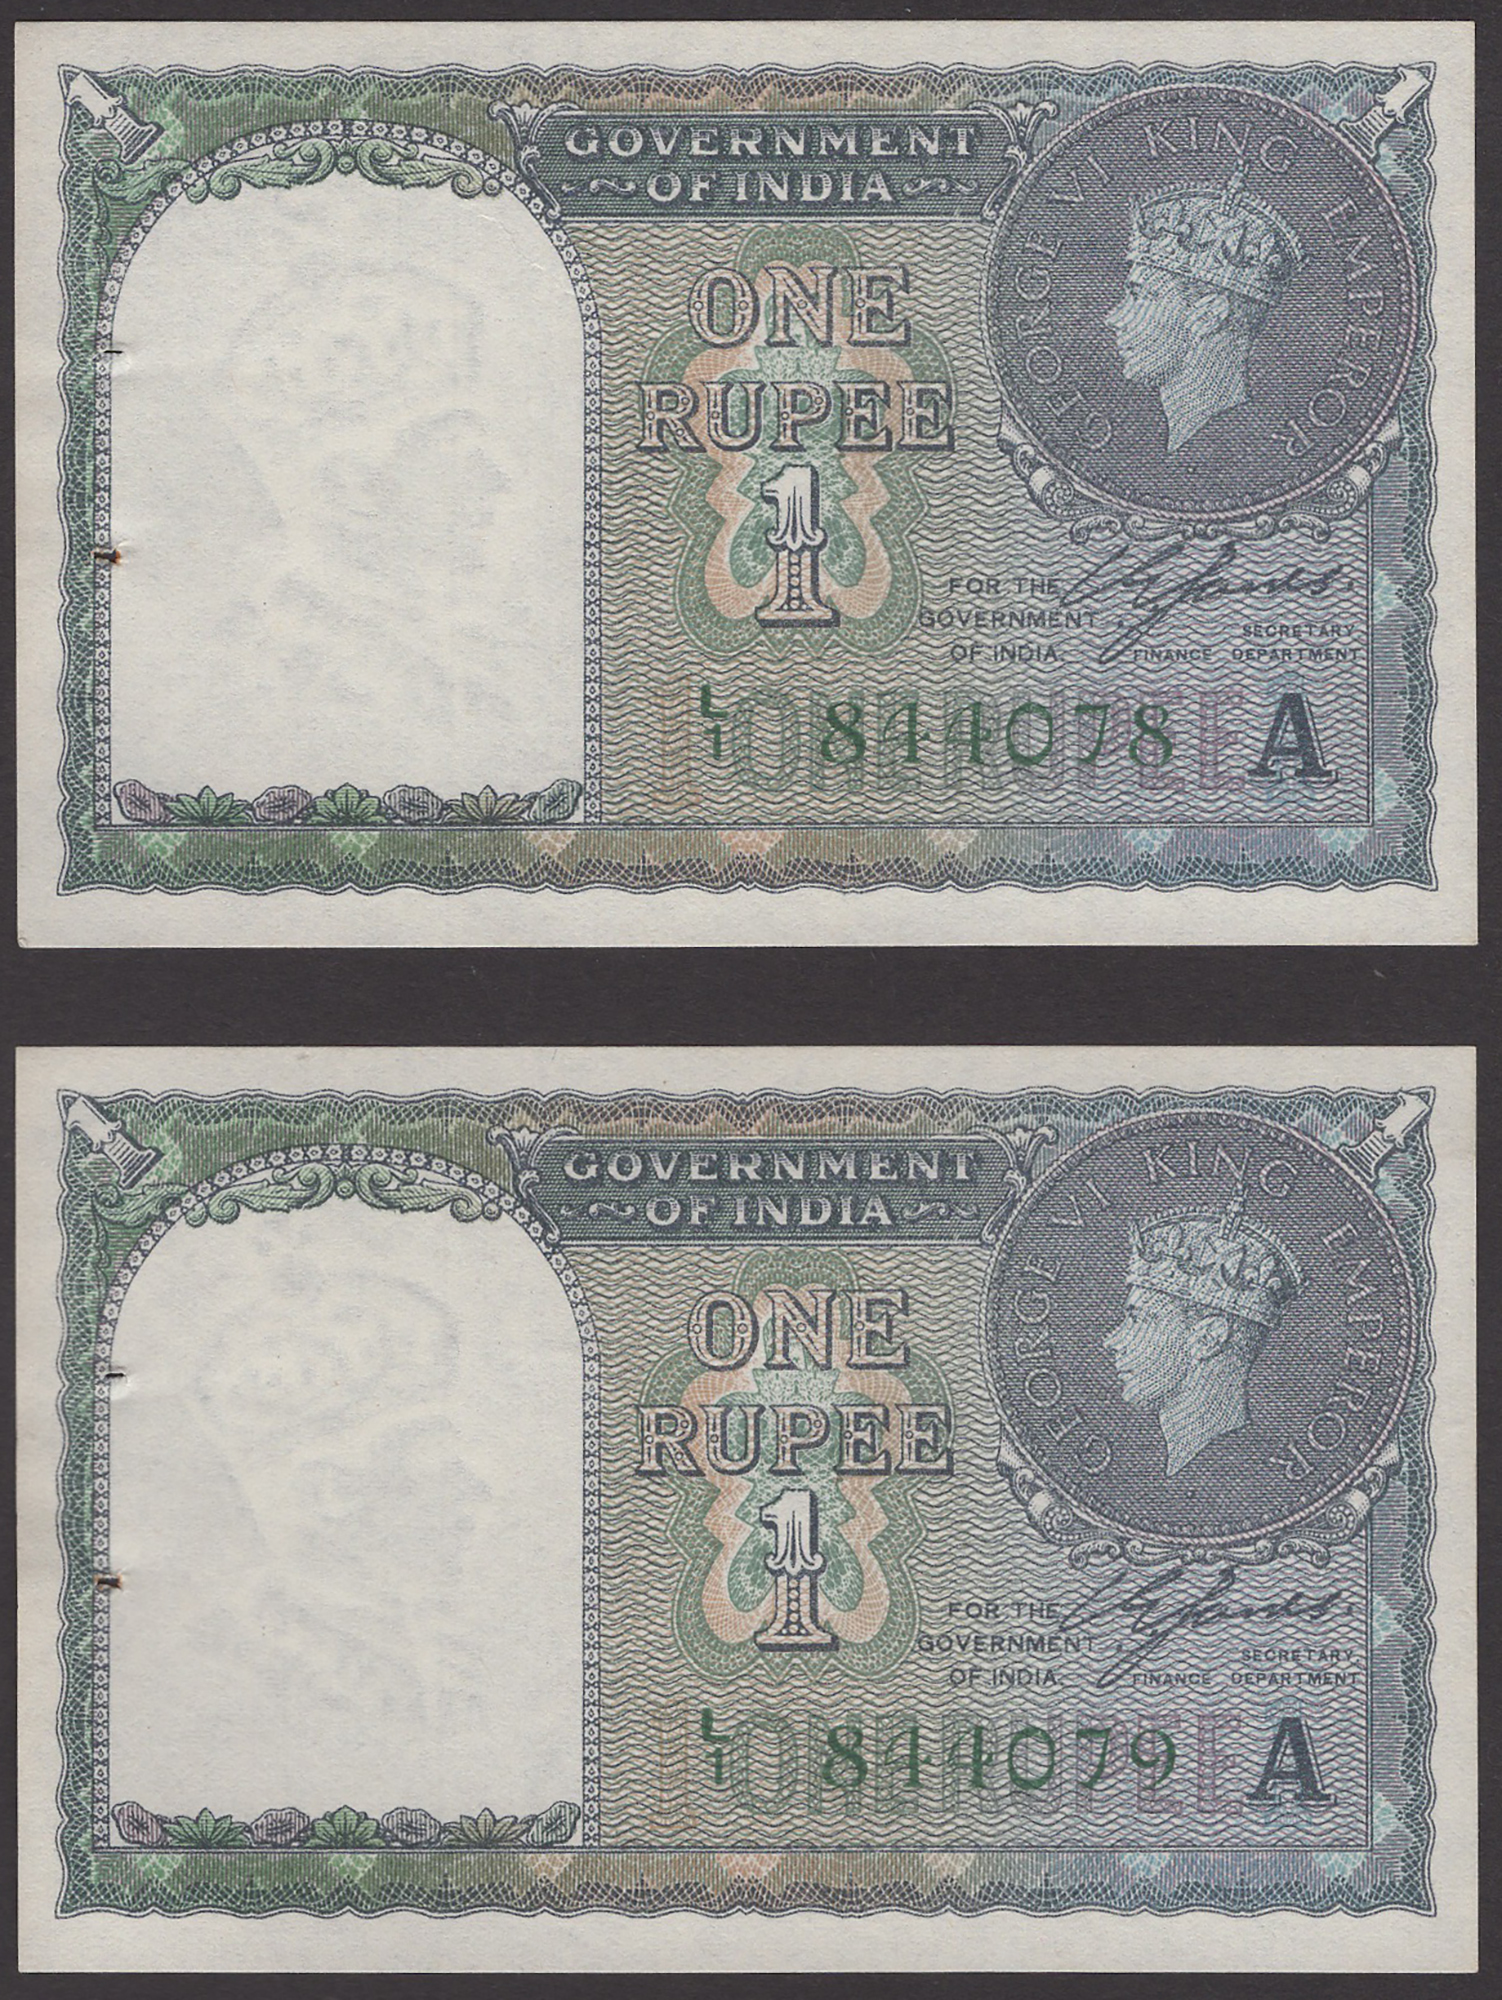 Government of India, 1 Rupee (5), 1940, serial numbers V/21 513315, V/21 513317, L/1... - Image 3 of 4